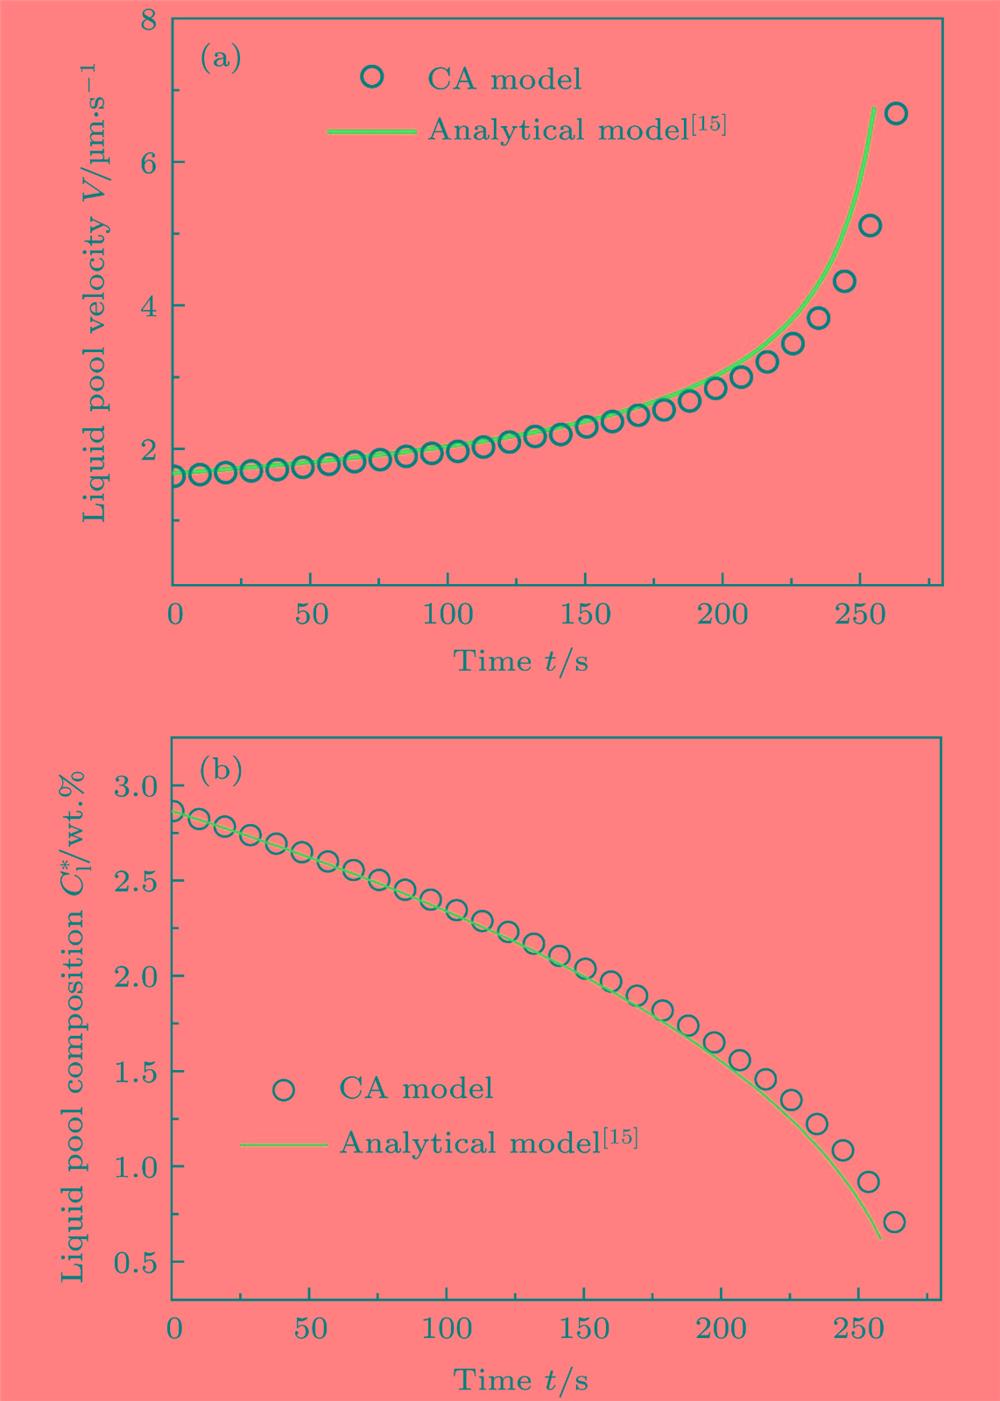 Comparison of the CA simulation with the analytical prediction[15] regarding the time evolution of (a) liquid pool velocity and (b) liquid pool composition for a SCN–0.3 wt.% ACE alloy at , and G = 12°C/mm.SCN–0.3 wt.%ACE合金在()和G = 12 °C/mm条件下, (a)熔池迁移速度和(b)熔池成分随时间变化的CA模拟和解析模型[15]预测结果的比较